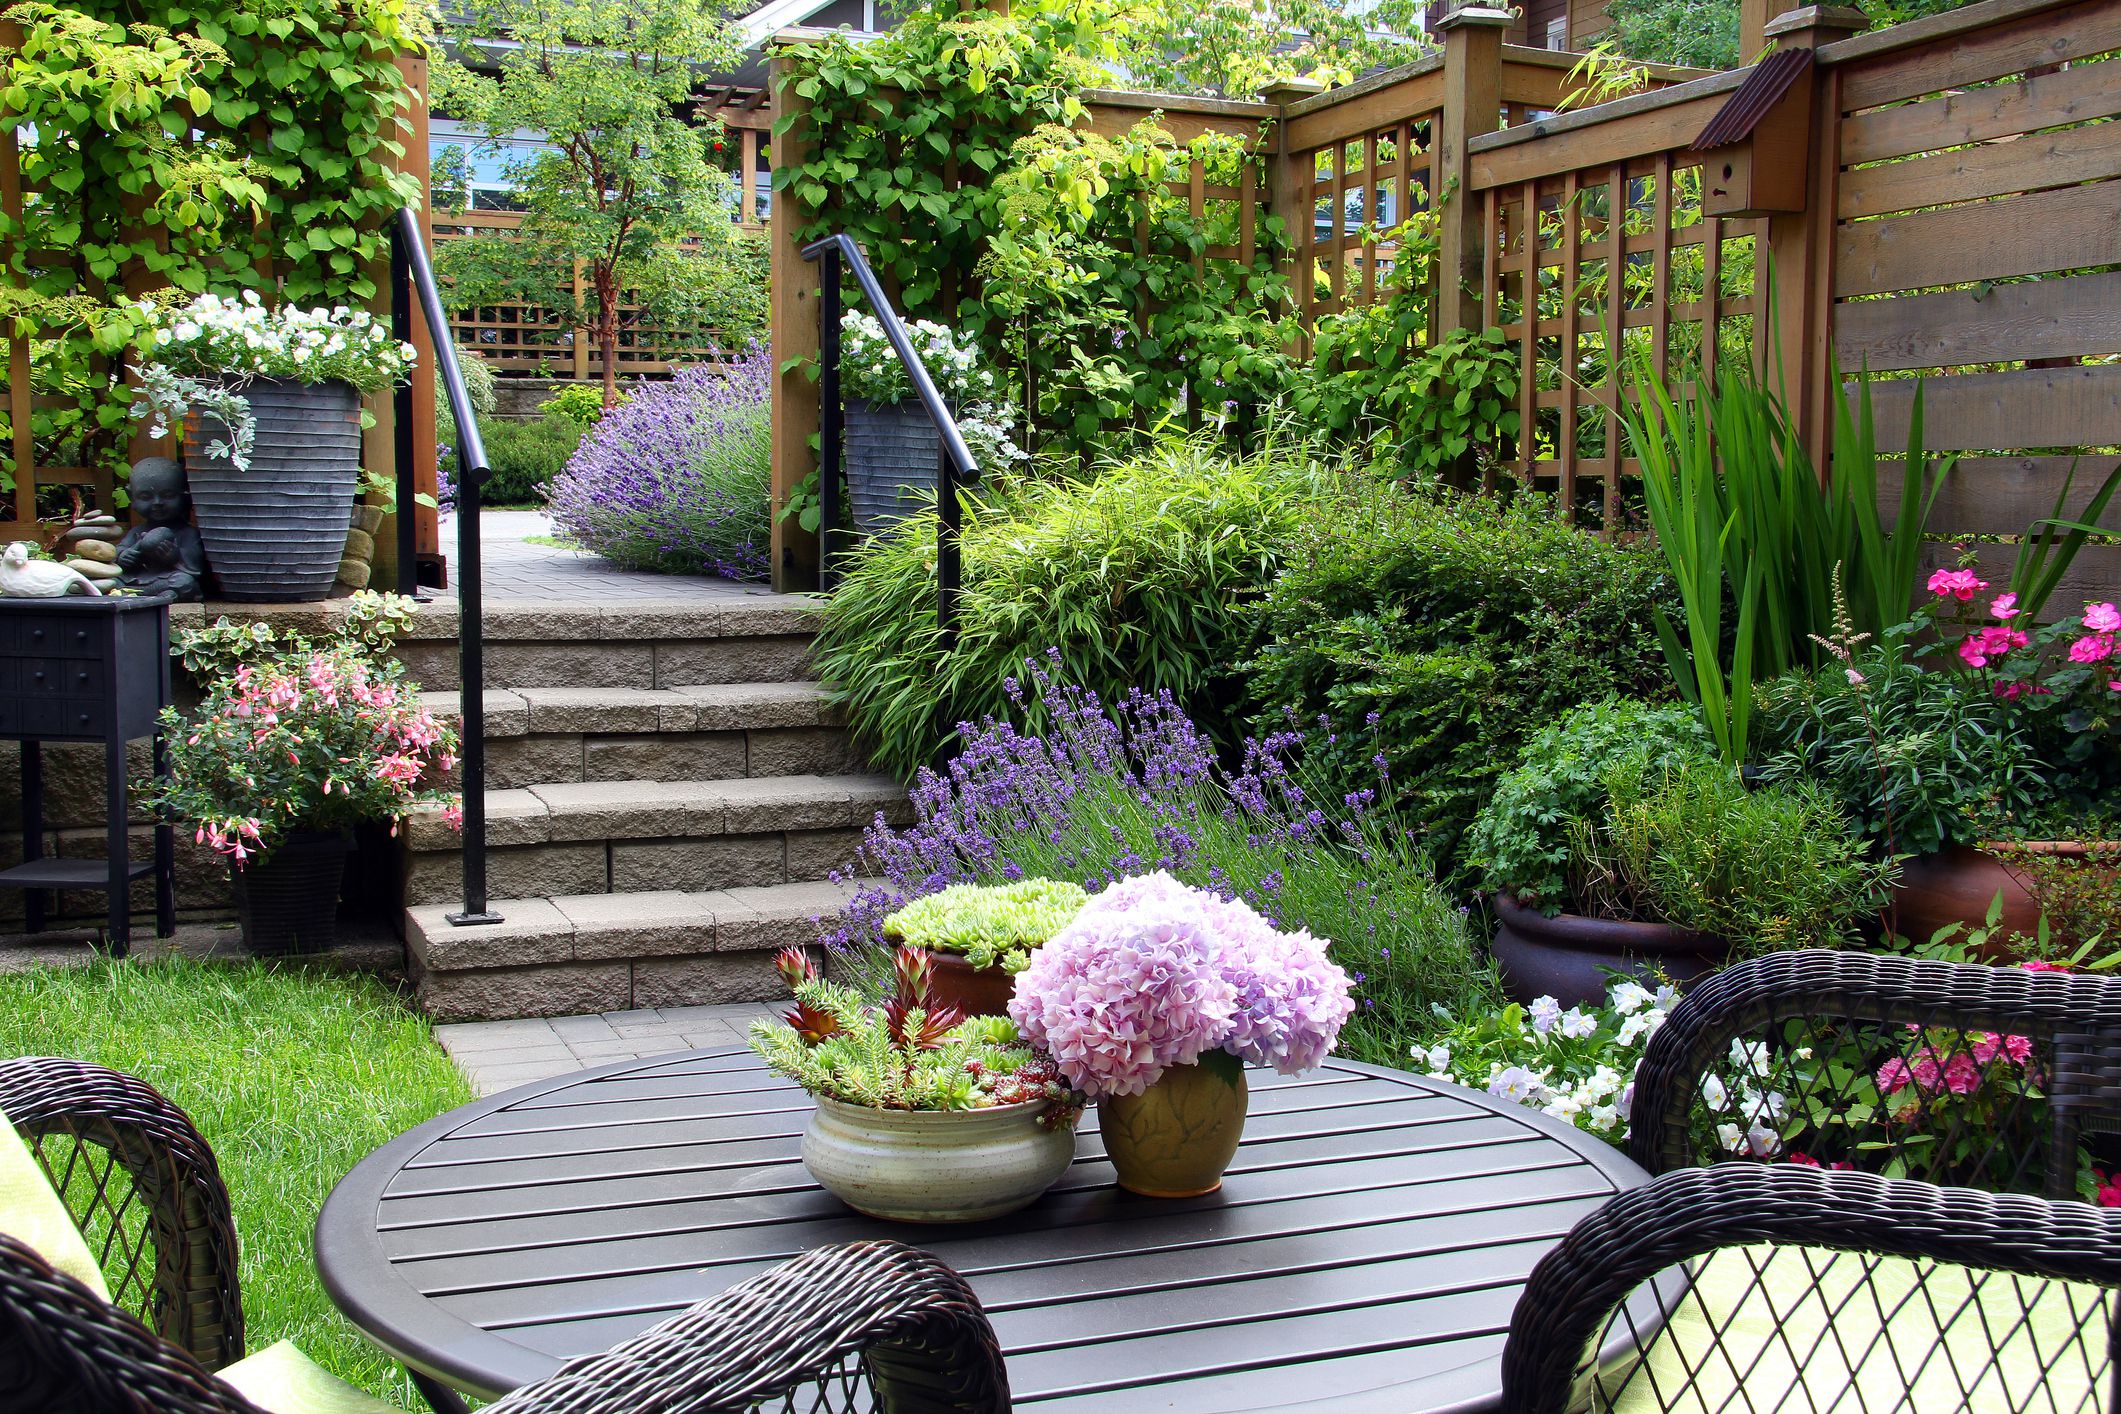 How To Make The Most Of A Small Garden